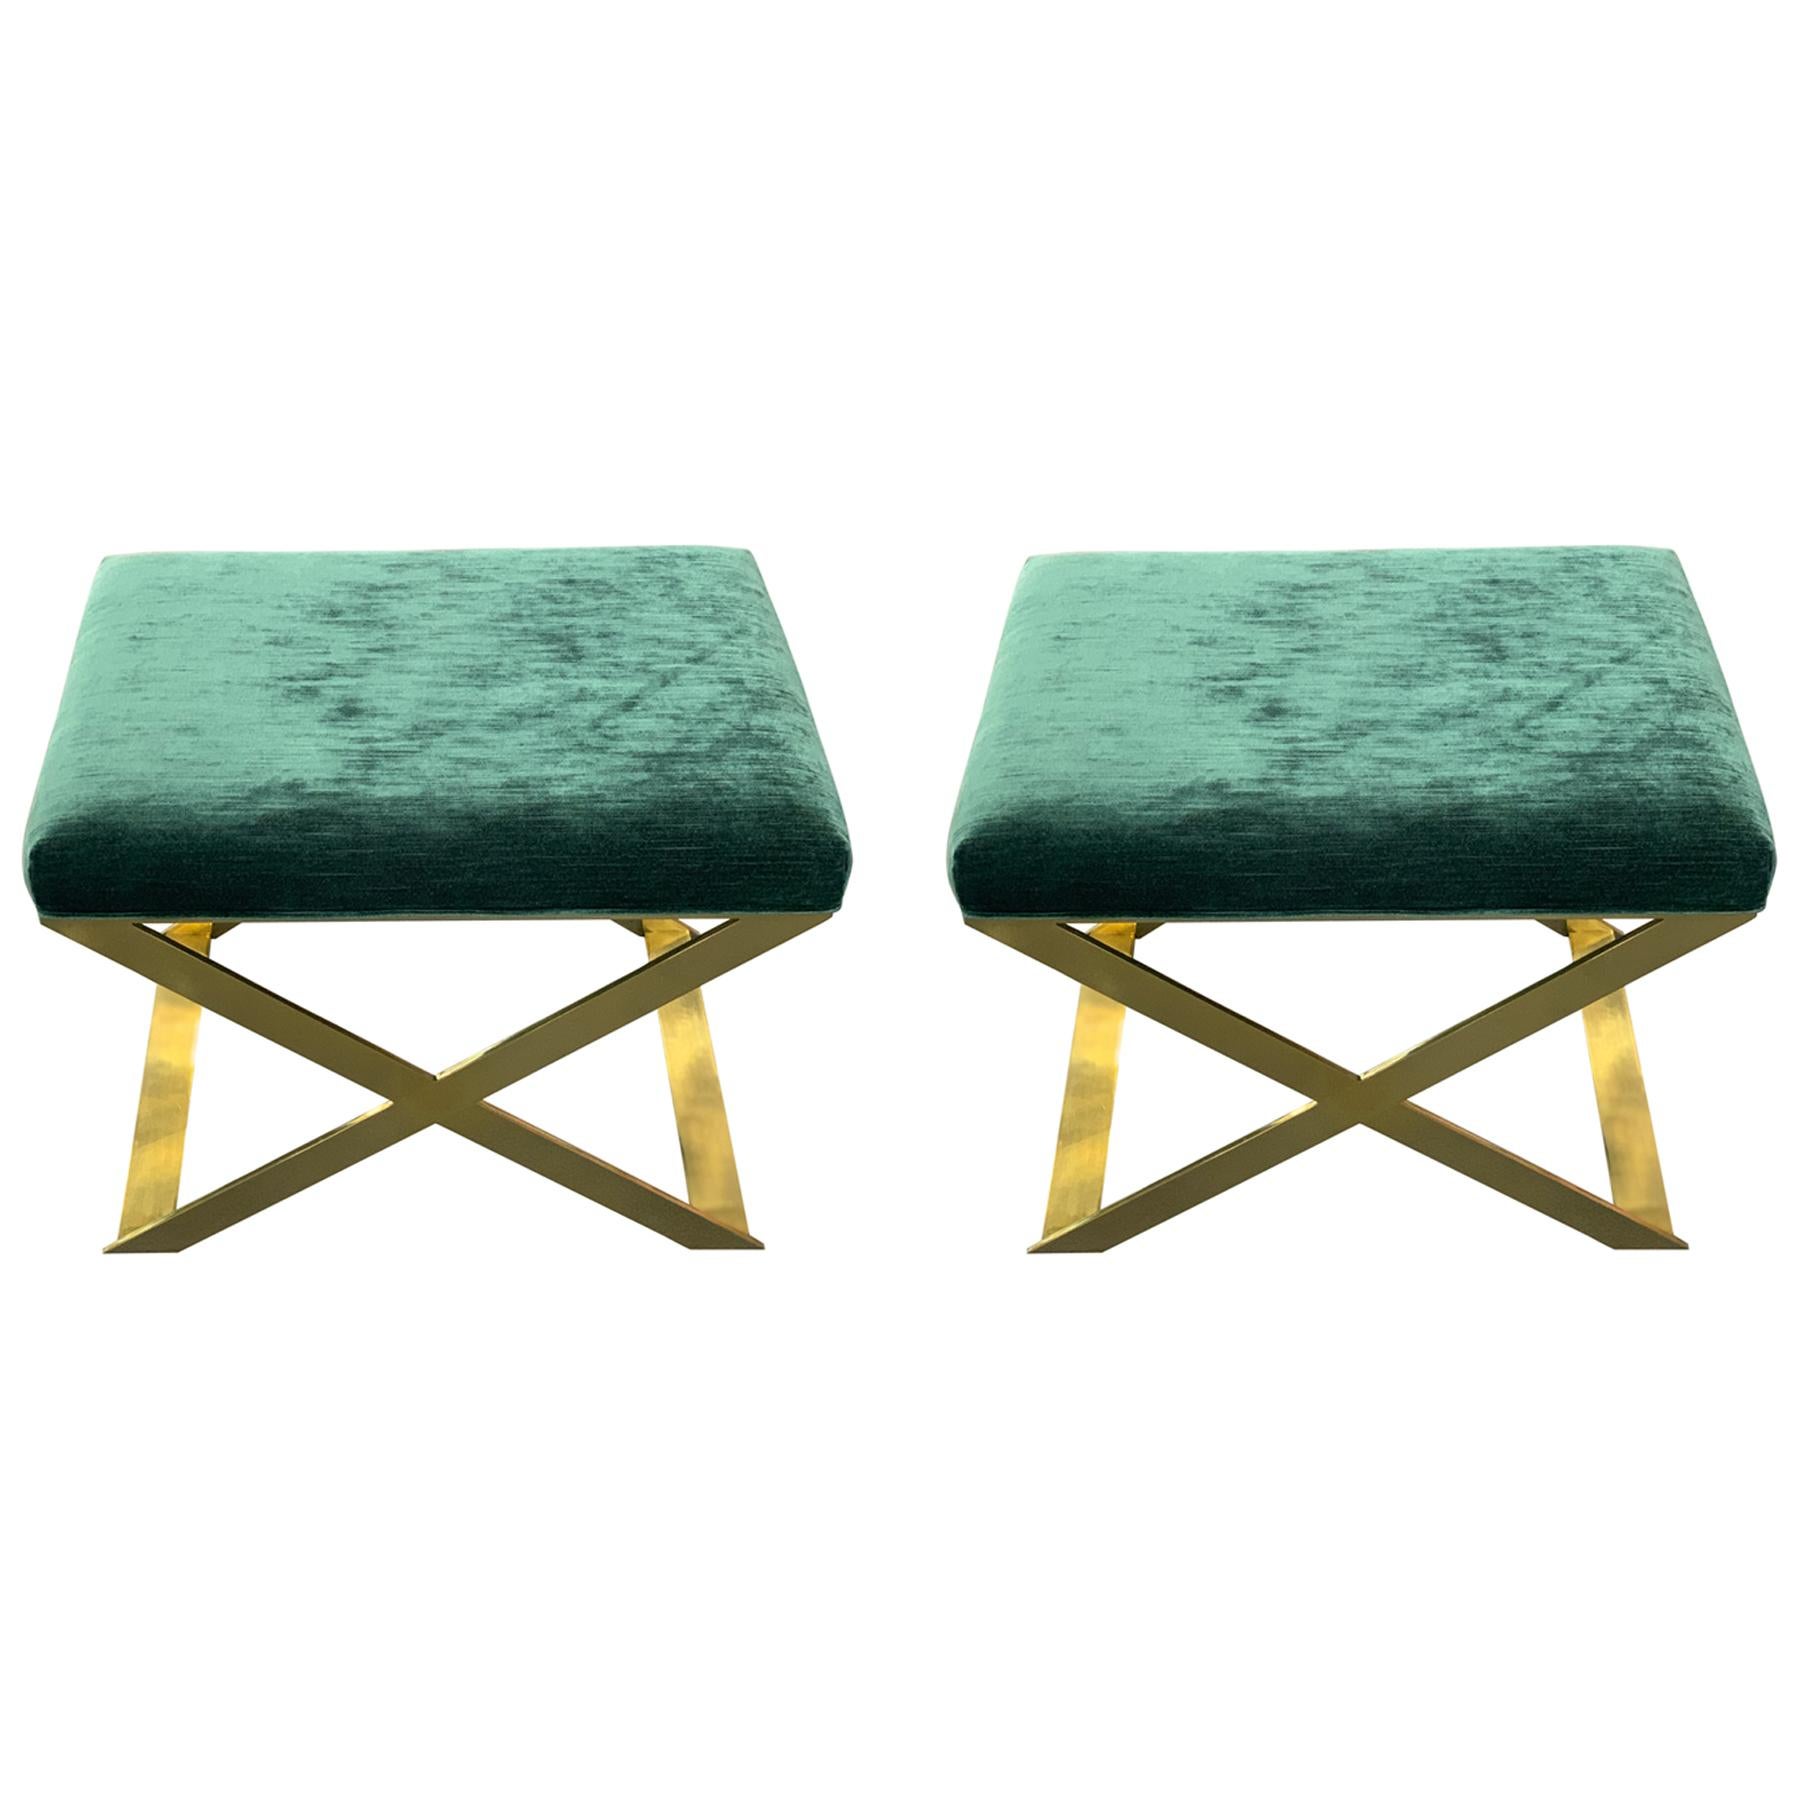 Pair of X-Leg Stool in Polished Brass and Teal Ribbed Velvet